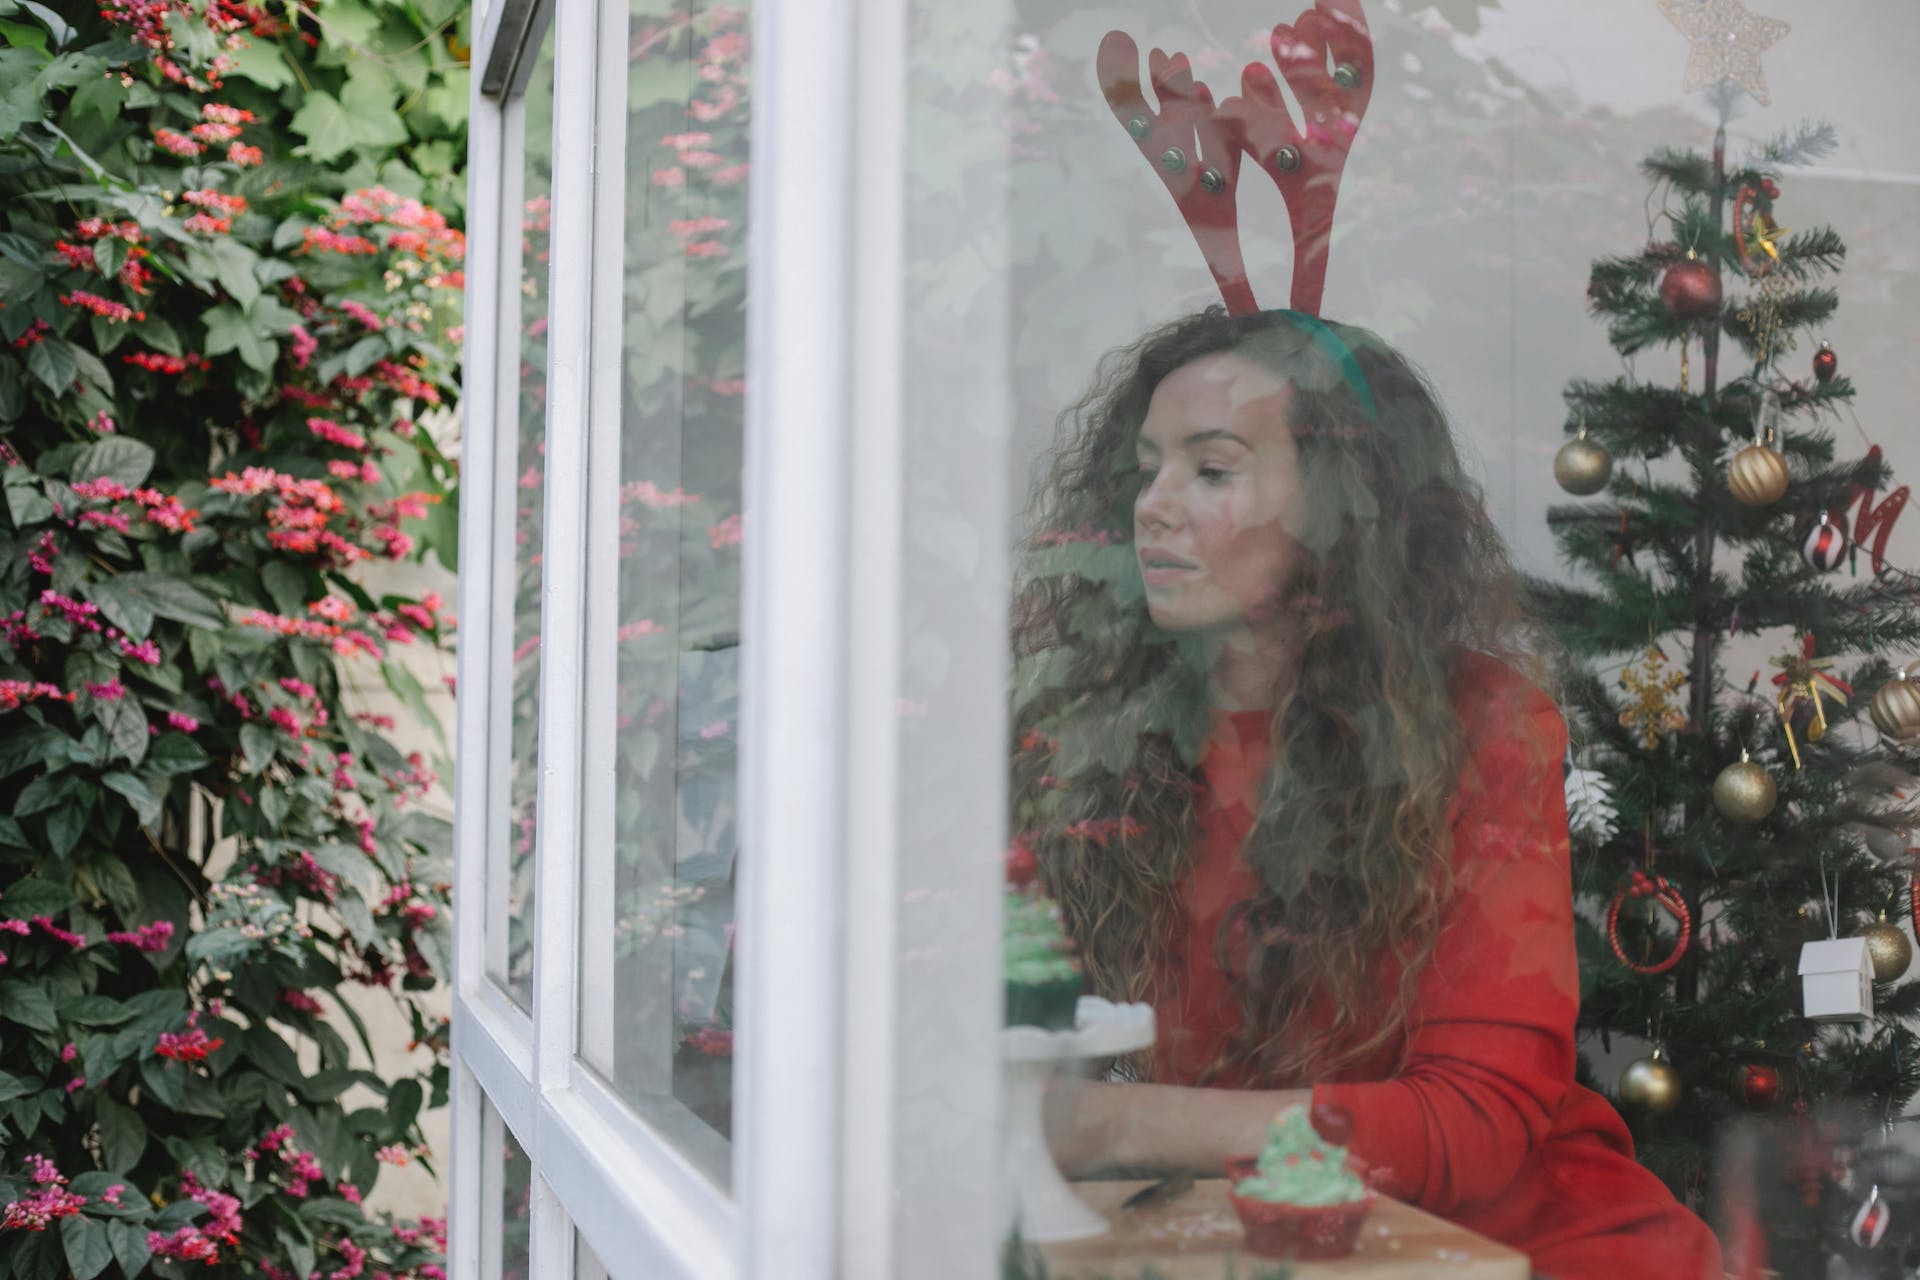 A woman dressed as a reindeer sitting beside a Christmas tree and looking outside | Source: Pexels